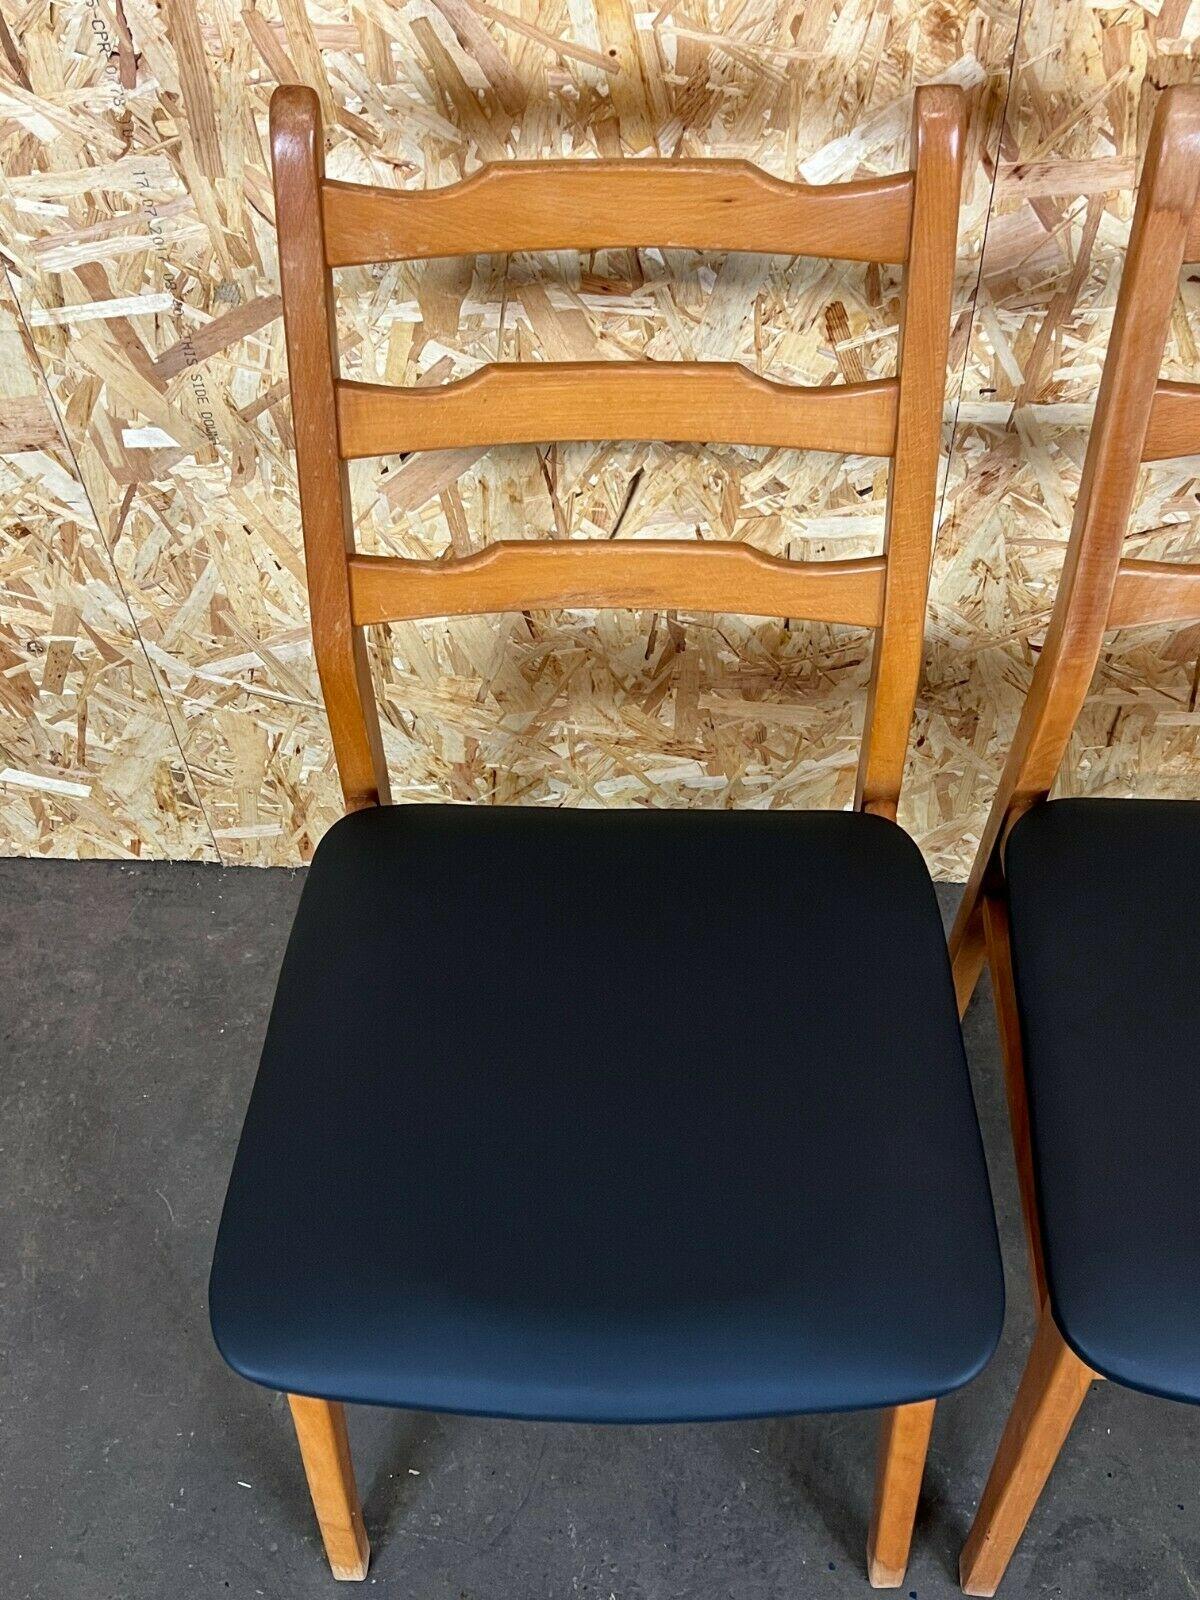 2x 70s Chairs Dining Chair Danish Upholstered Chair Mid Century Design In Good Condition For Sale In Neuenkirchen, NI